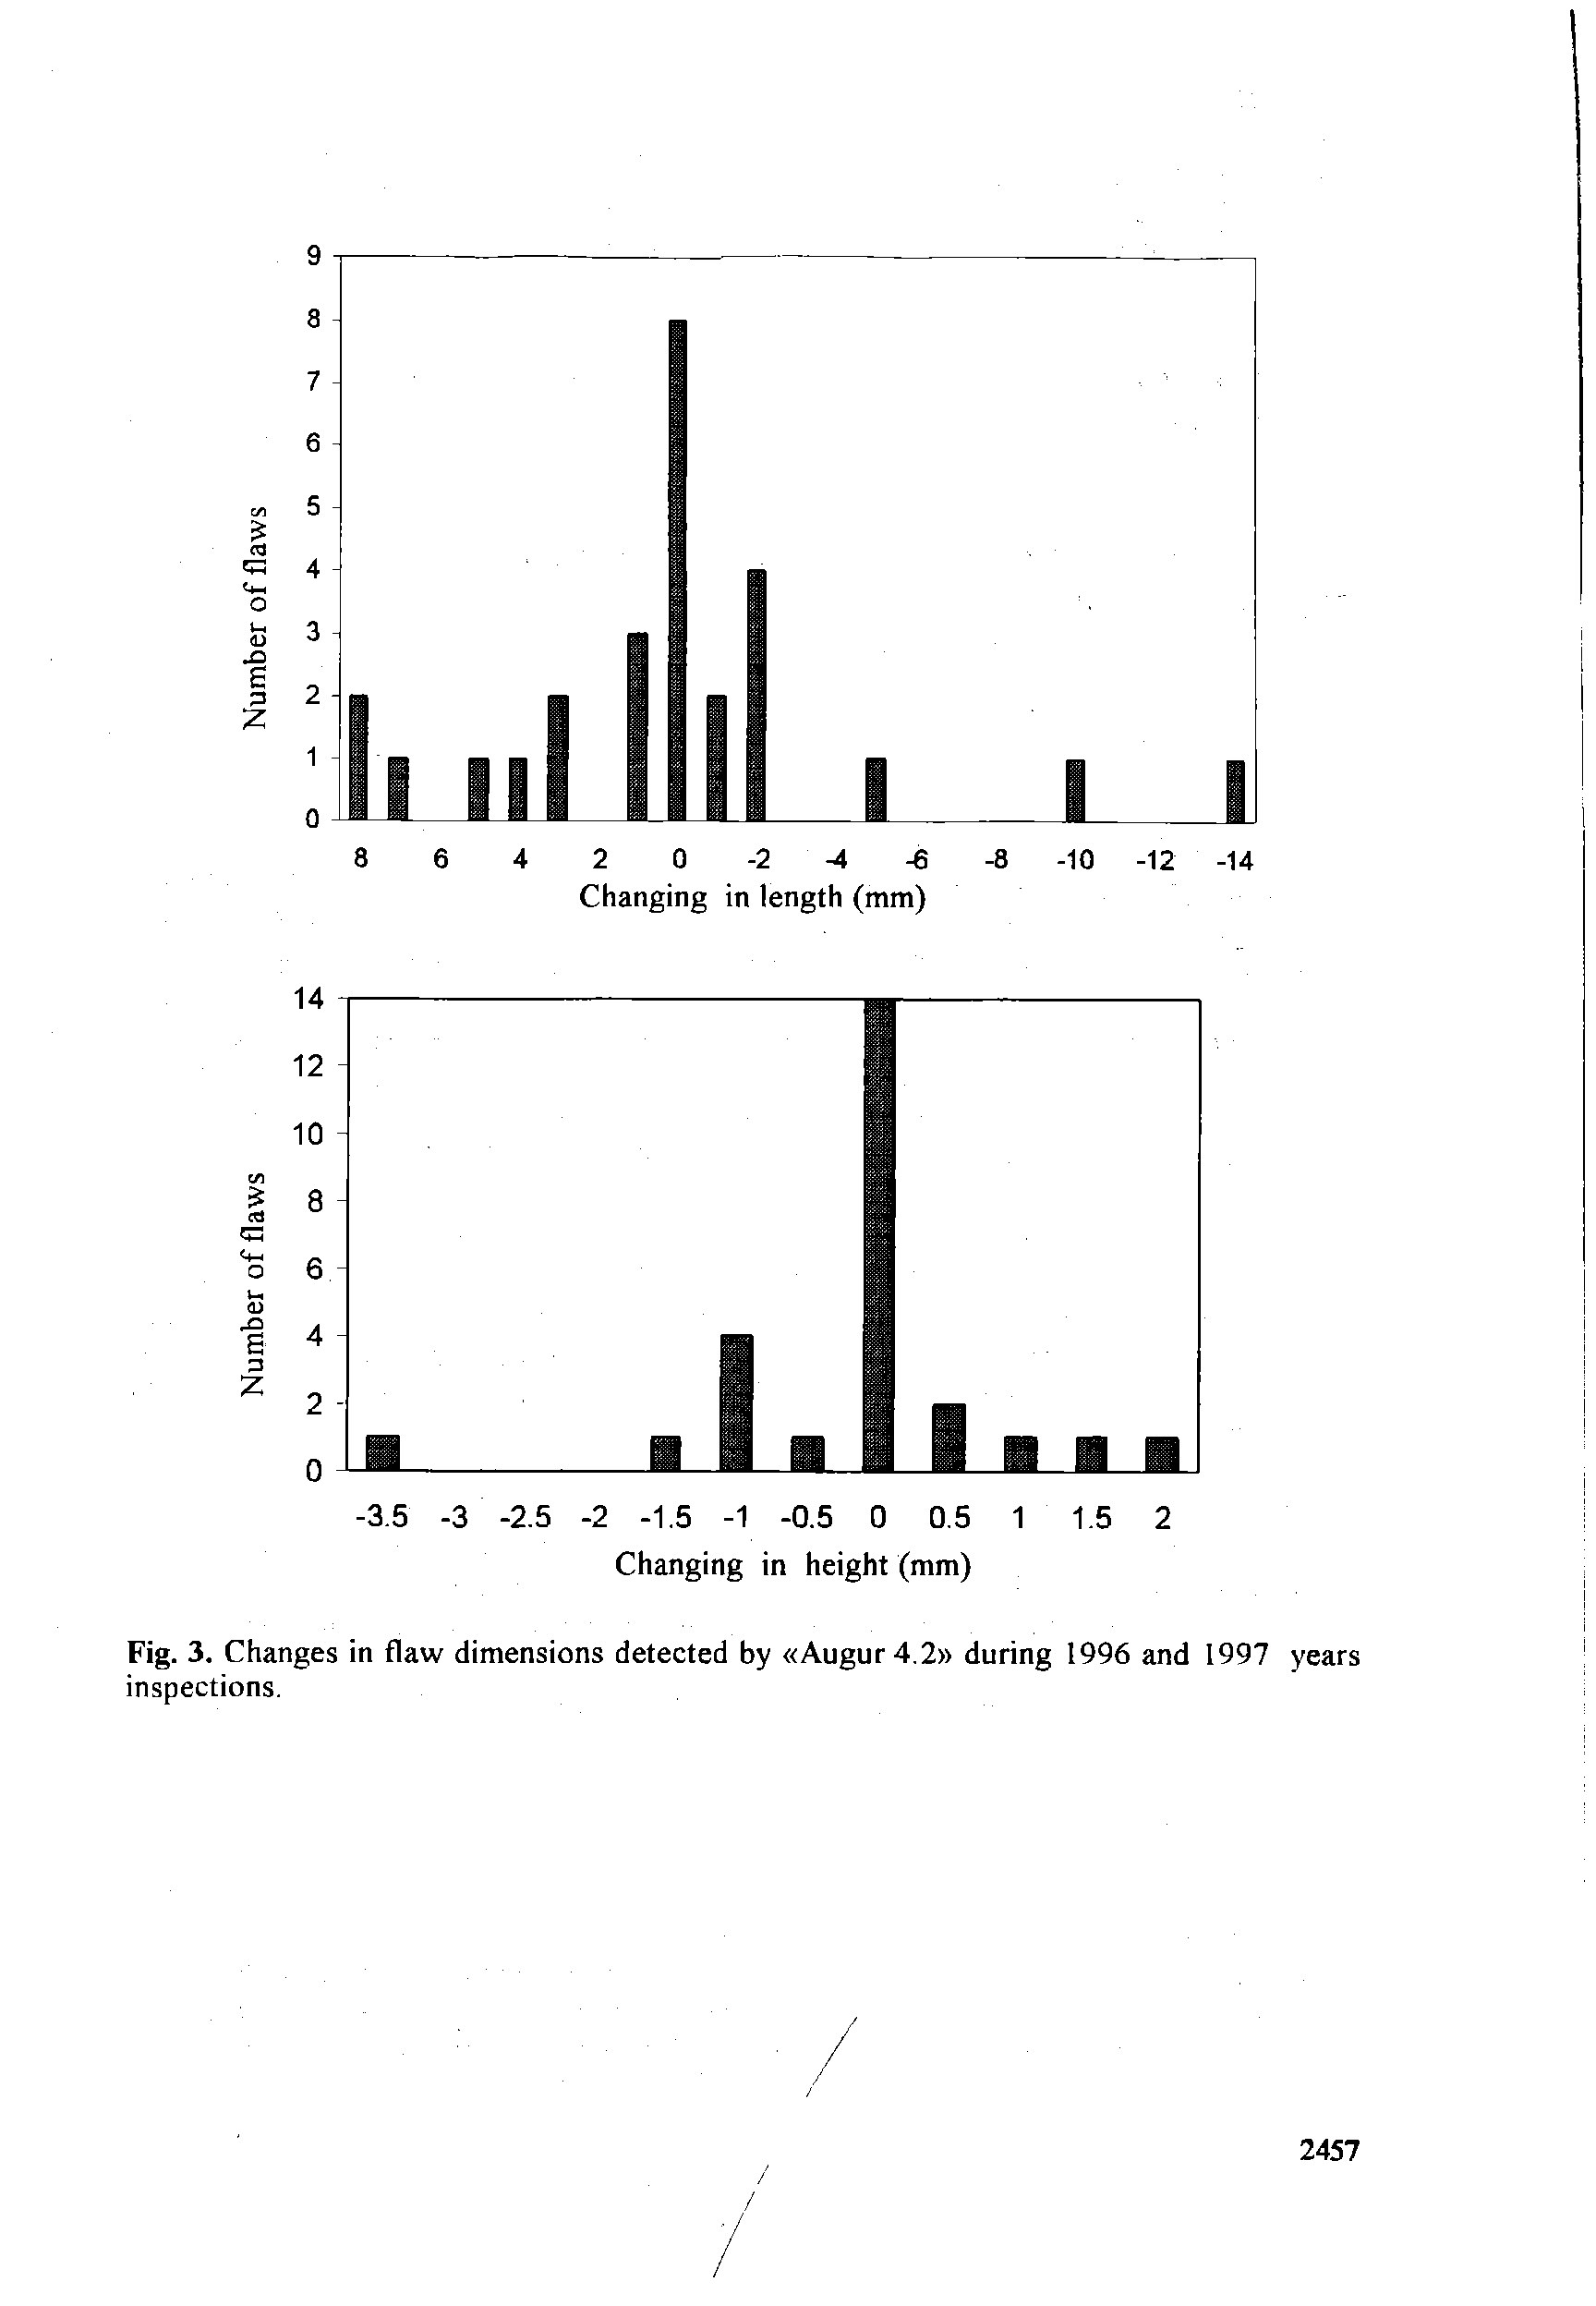 Fig. 3. Changes in flaw dimensions detected by Augur4.2 during 1996 and 1997 years inspections.